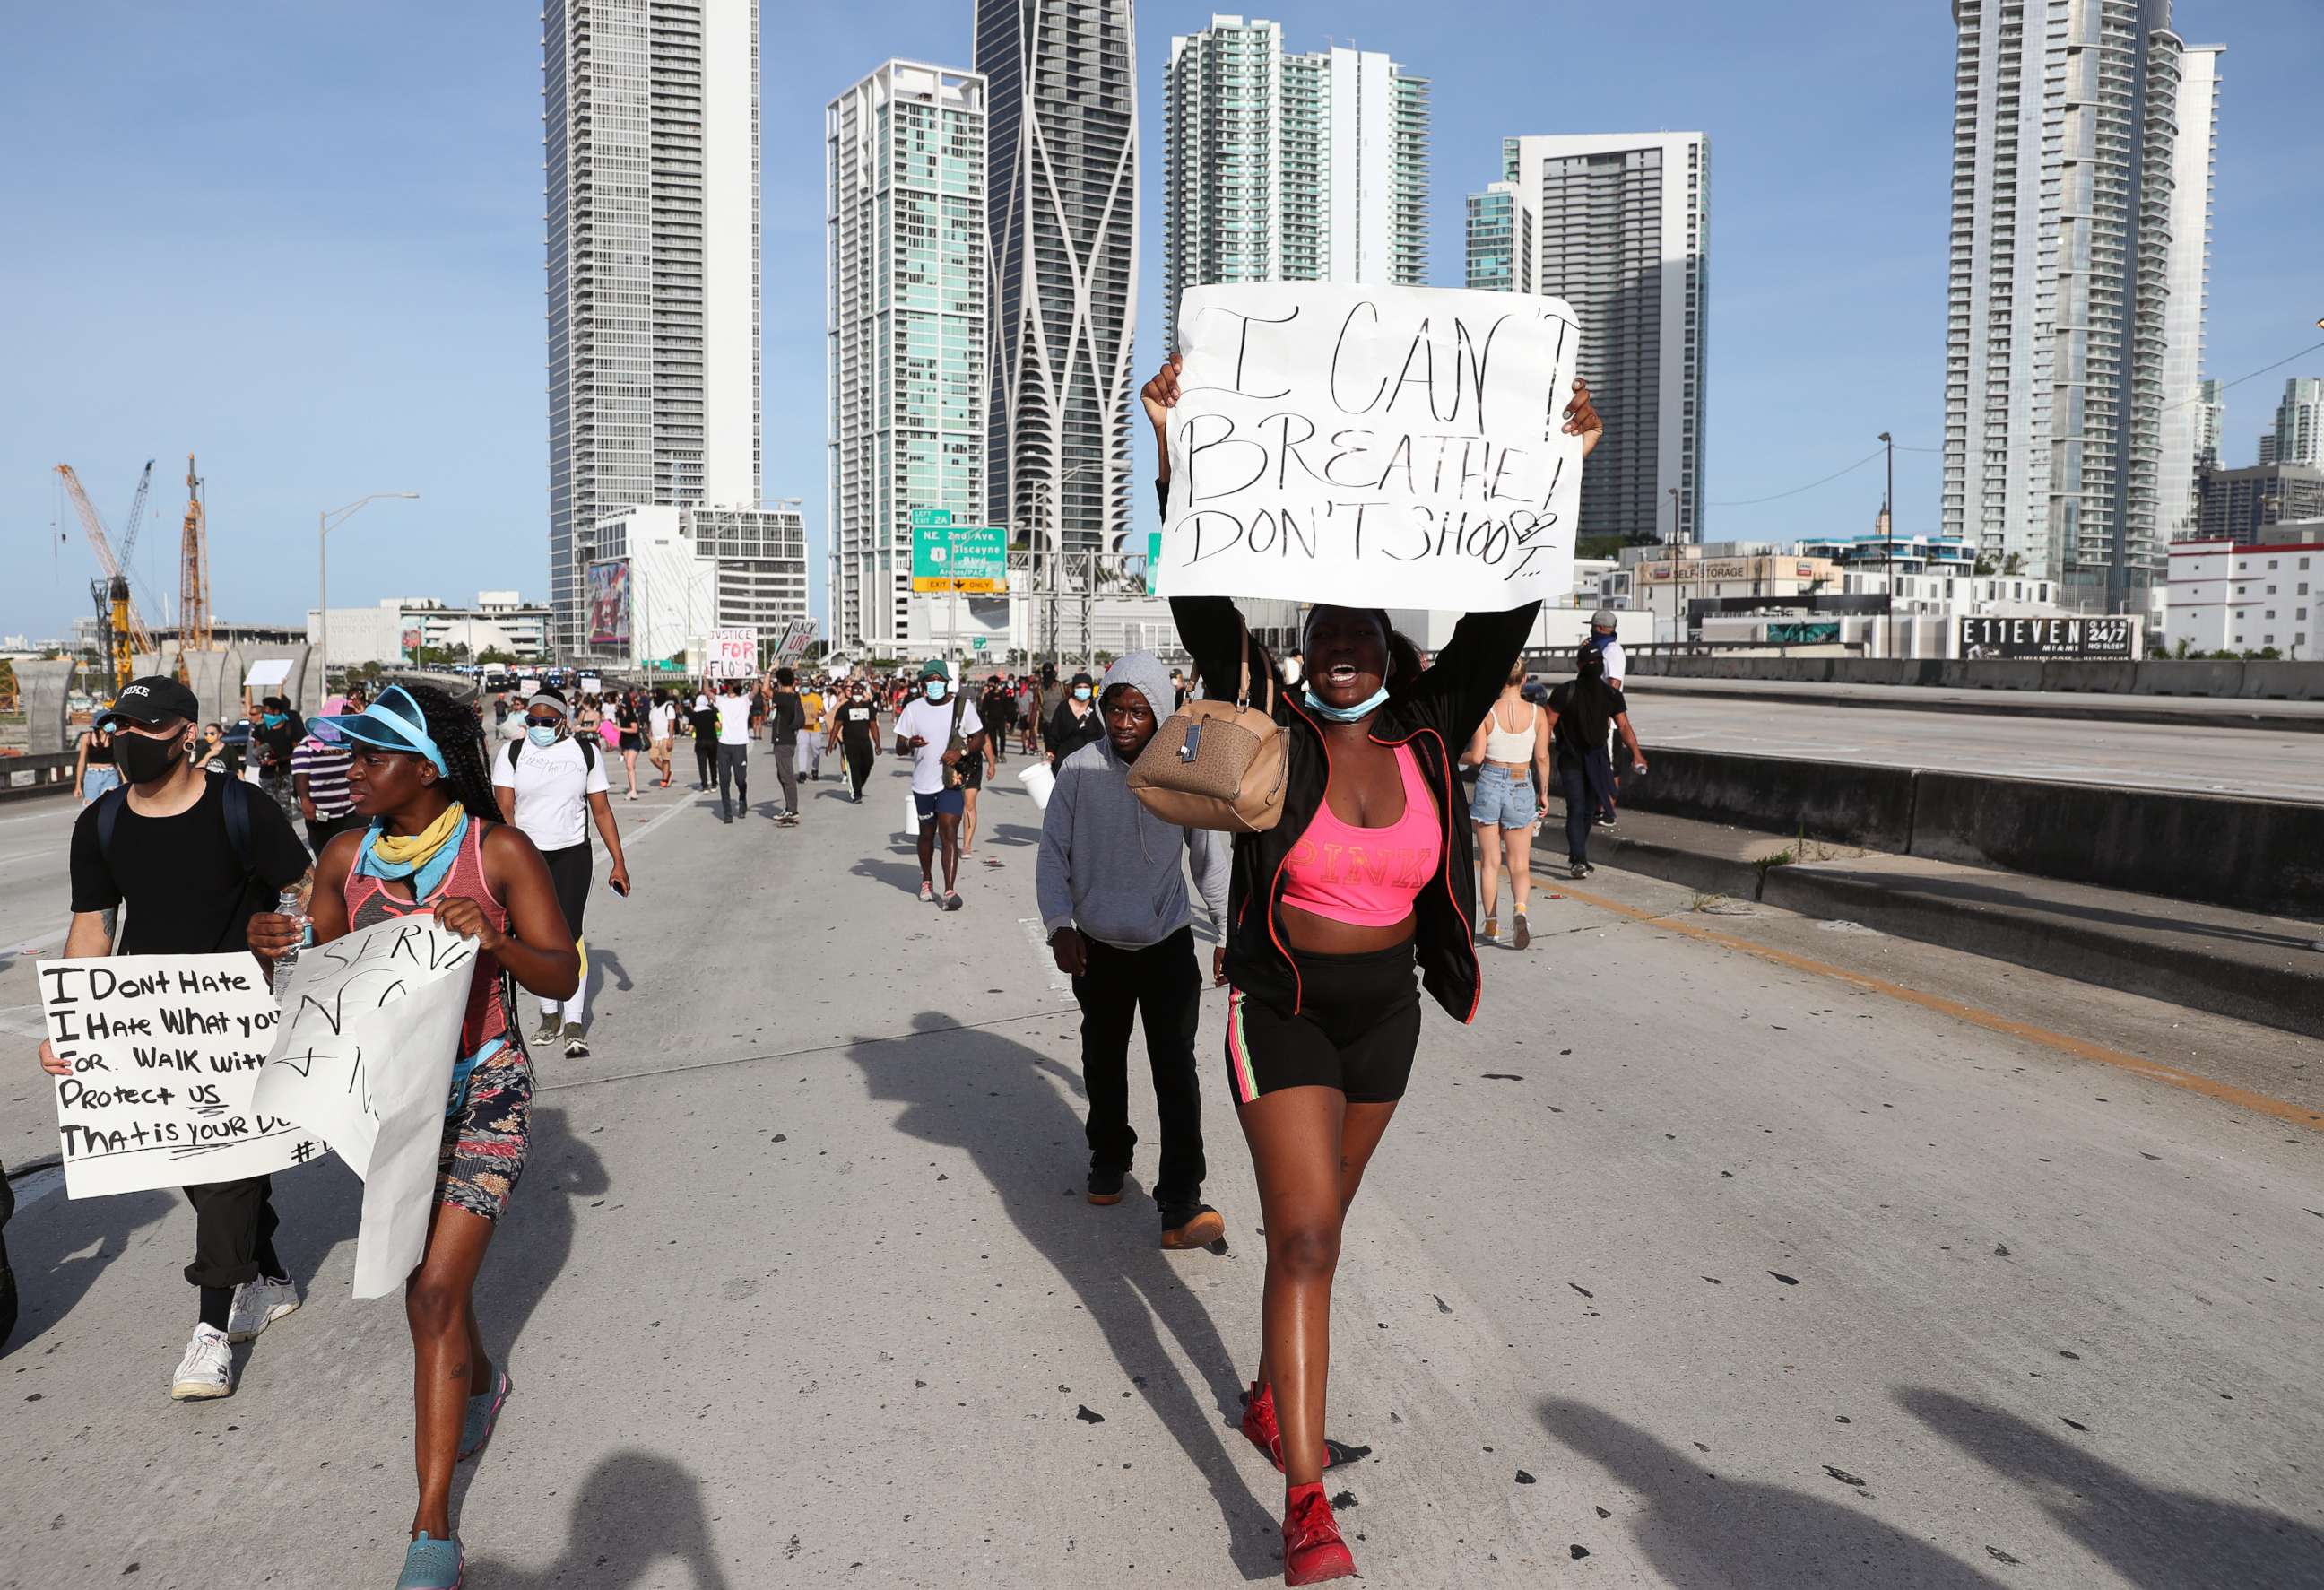 PHOTO: Demonstrators march on the closed freeway during a protest against police brutality and the recent death of George Floyd, on May 31, 2020, in Miami.